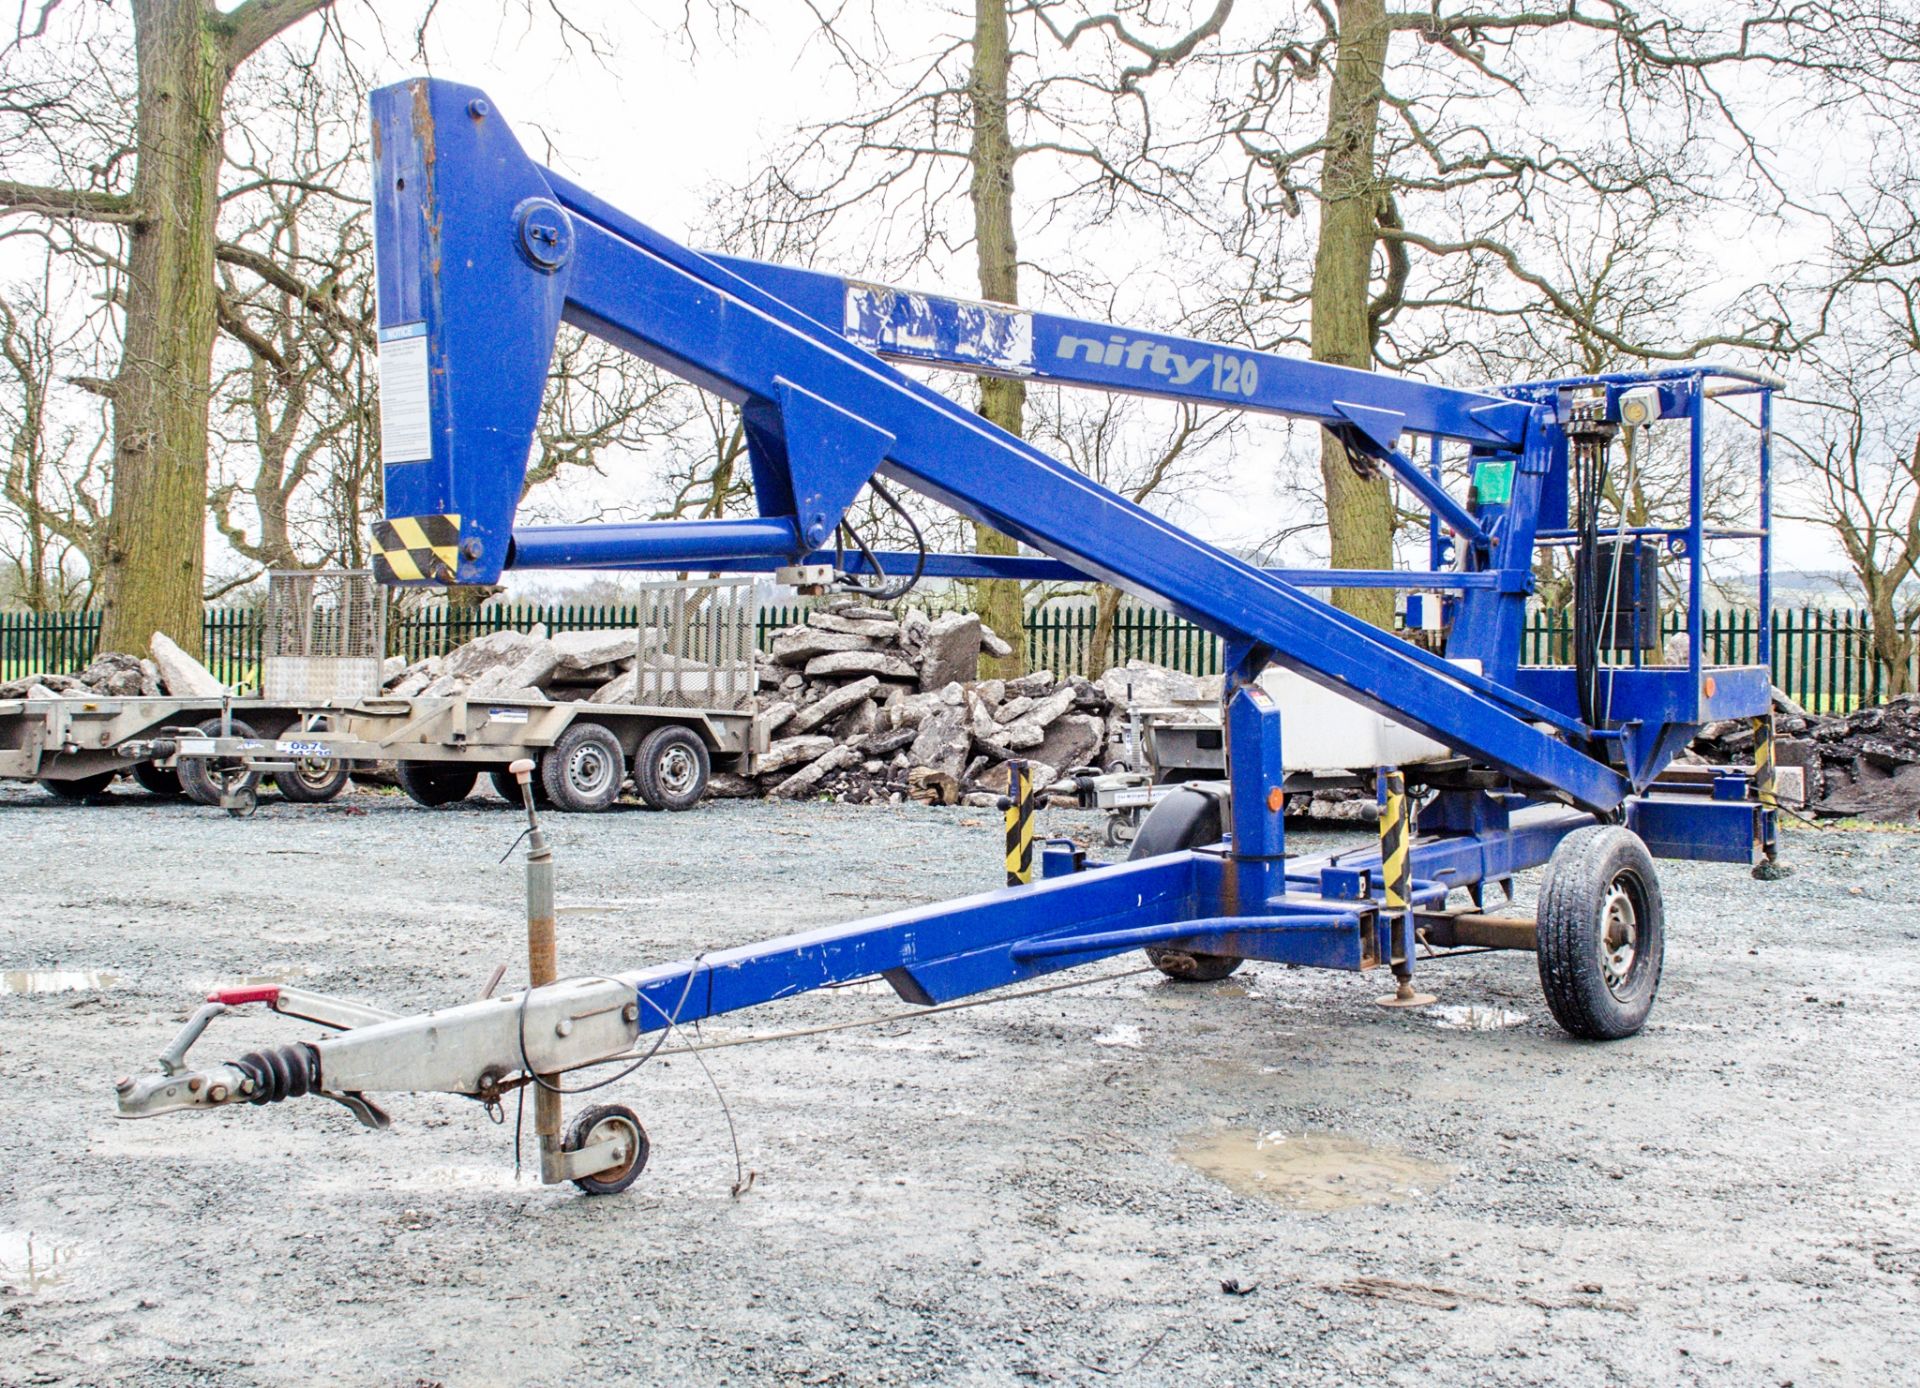 Nifty 120 ME fast tow boom access lift Year: 2005 S/N: 12698